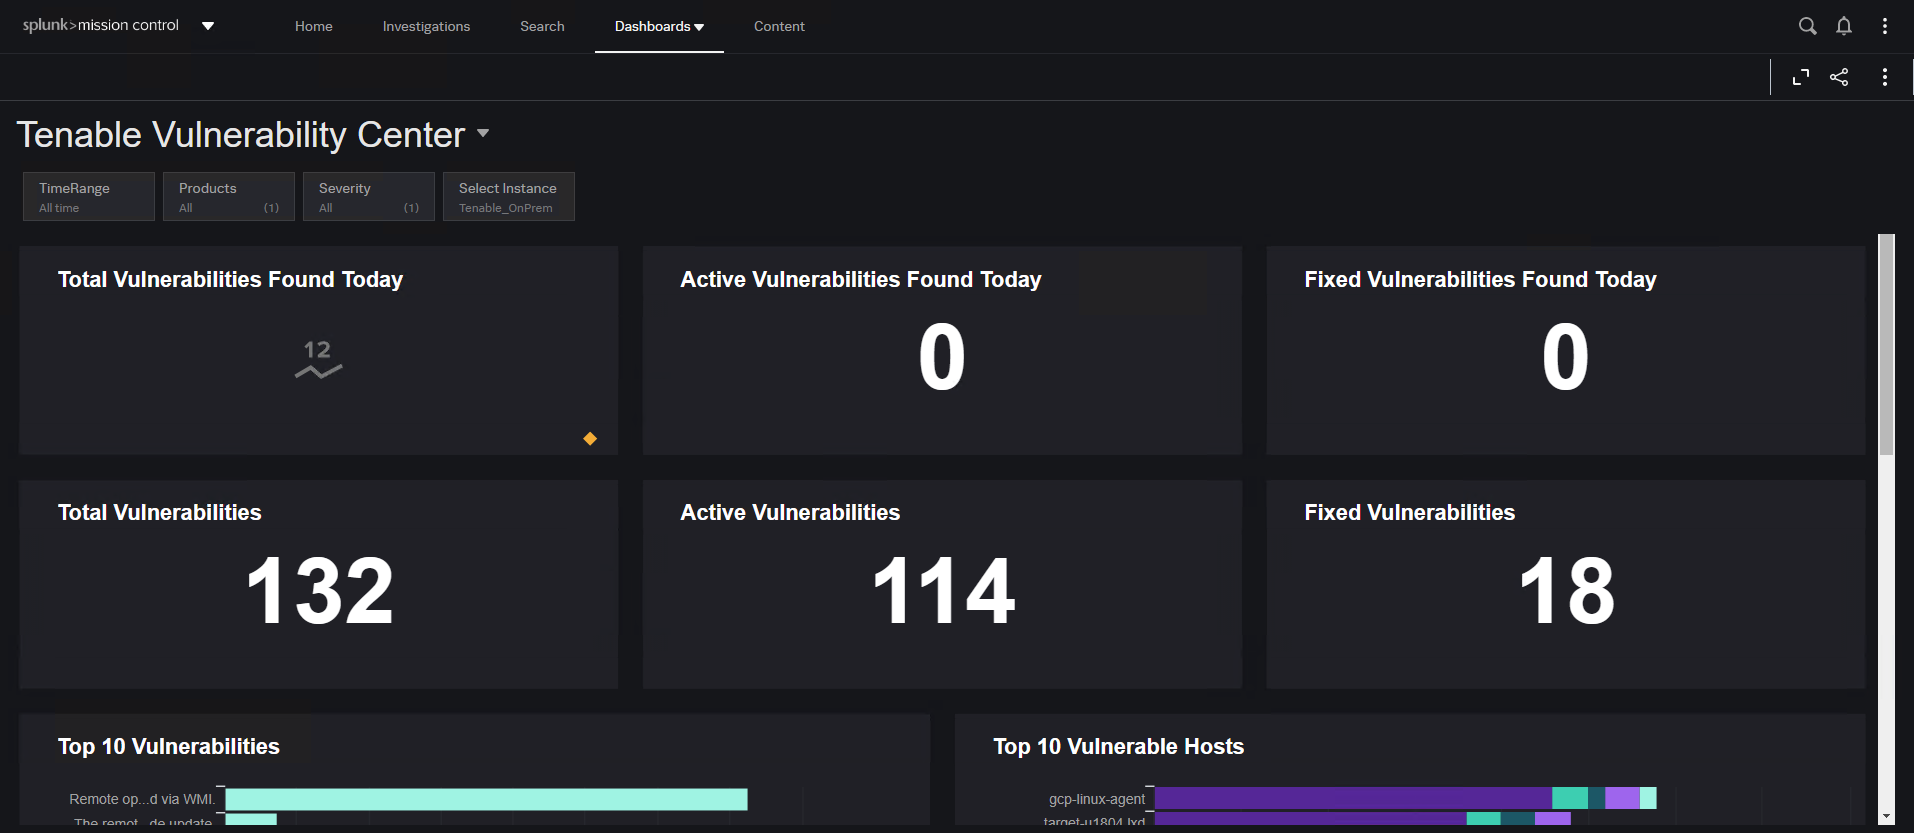 Screenshot of the Tenable Vulnerability Center within the Splunk Mission Control dashboard.